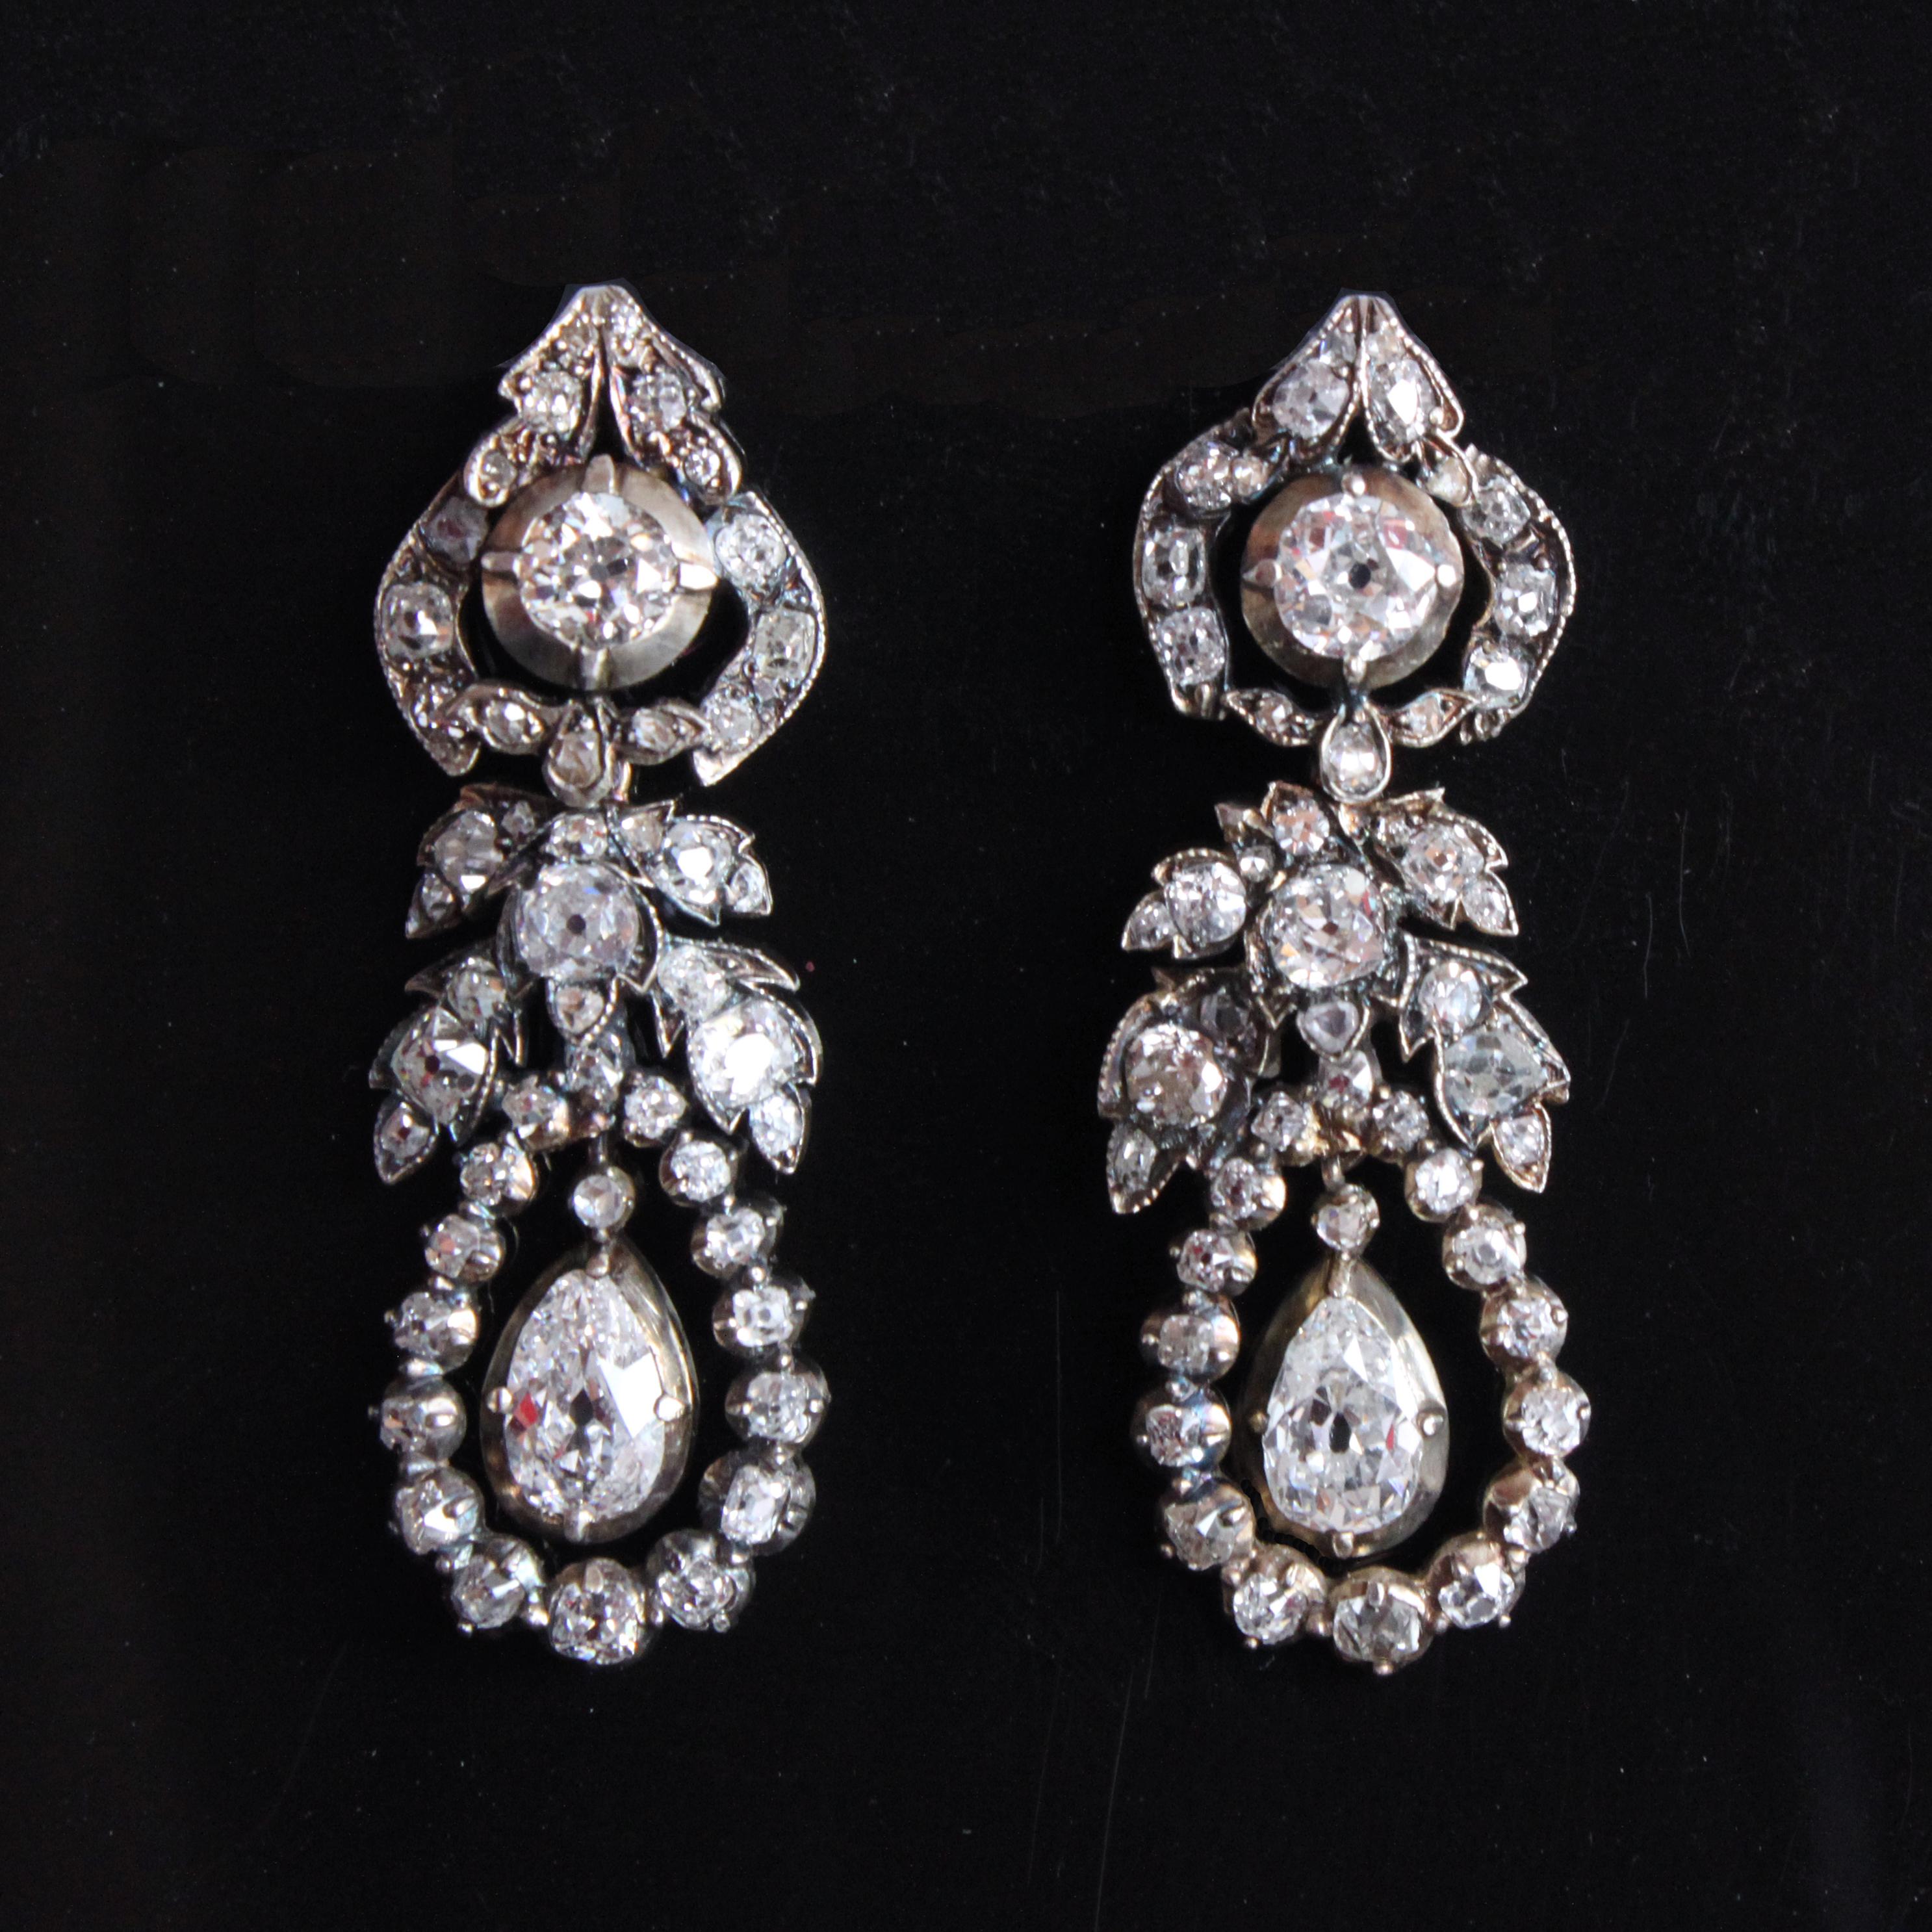 A beautiful and rare pair of Late Georgian Diamond Earrings, ca. 1810s

This rare pair of Georgian earrings is set with open work old-cut diamonds in a typical garland pendeloque style, suspending principal old-cut pear shaped diamonds of ca. 1.2